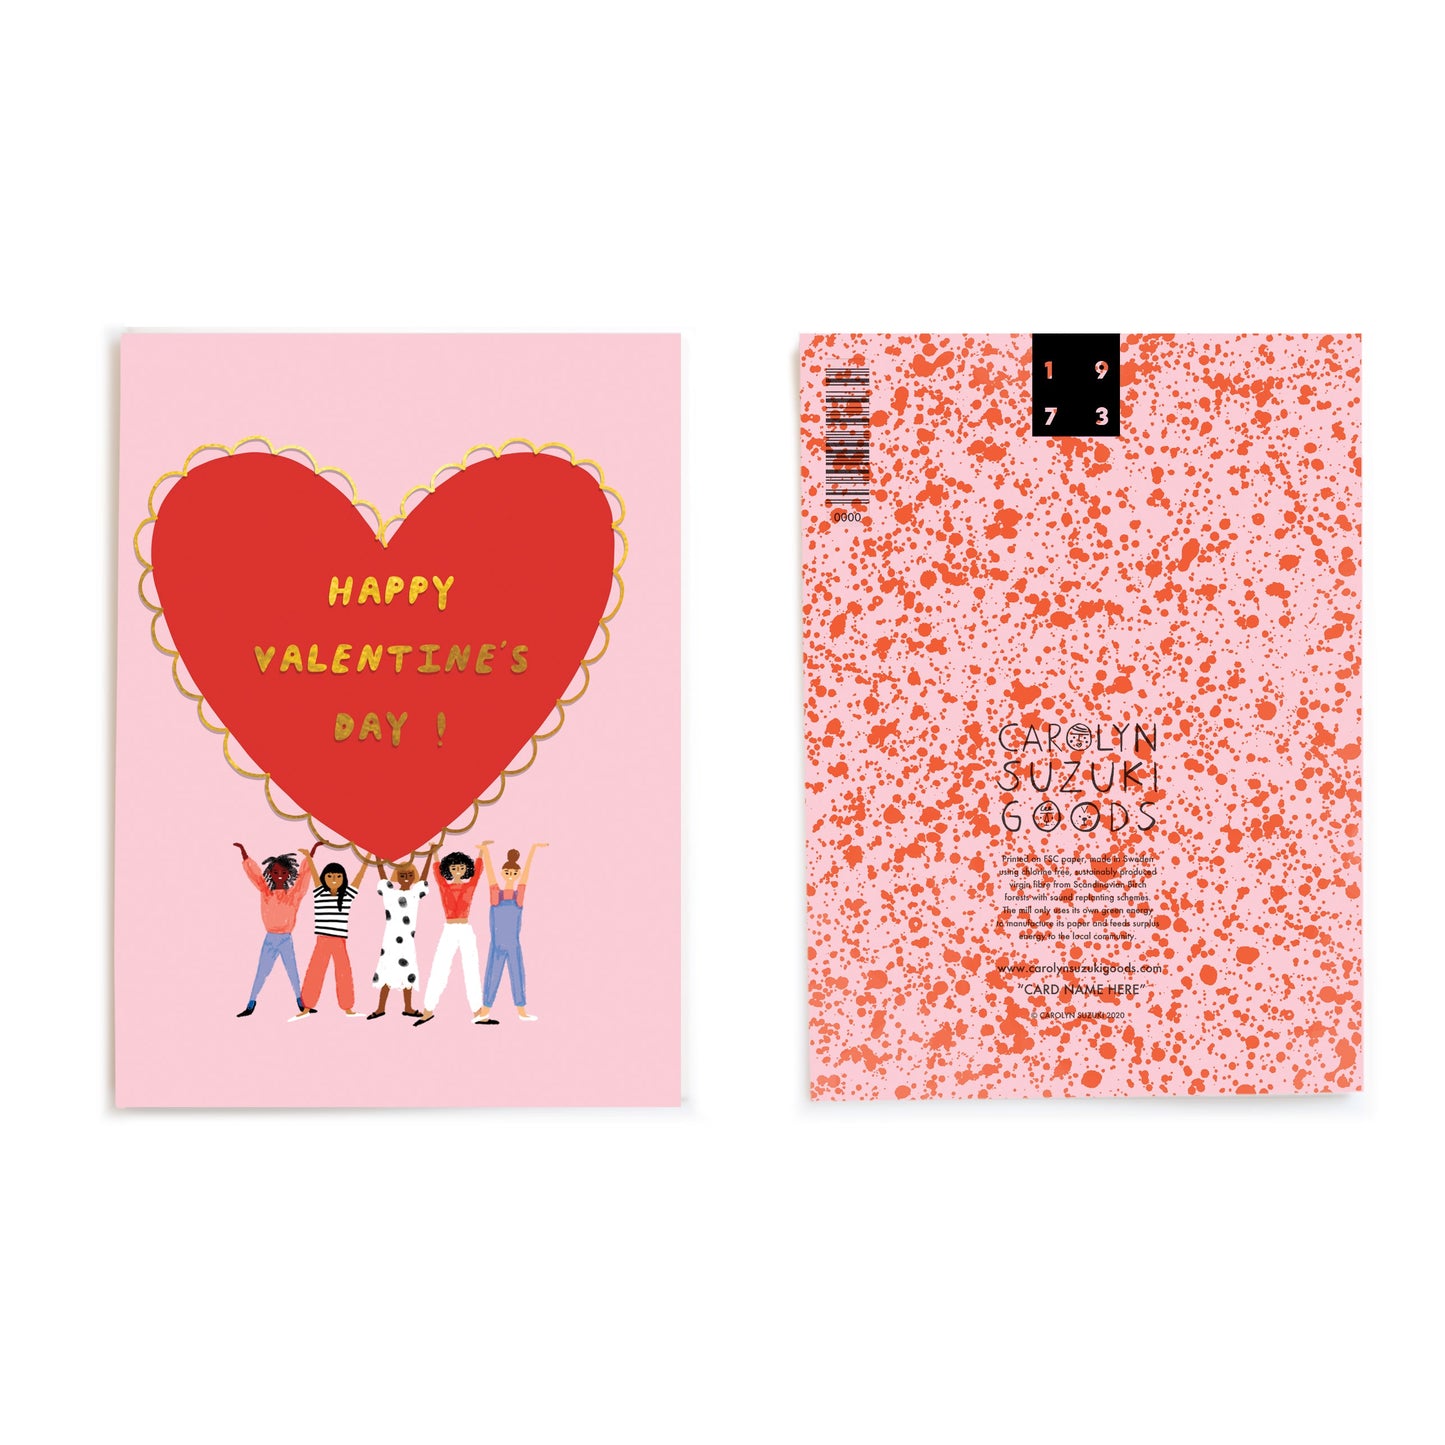 WE LOVE YOU - Valentine's Day Card